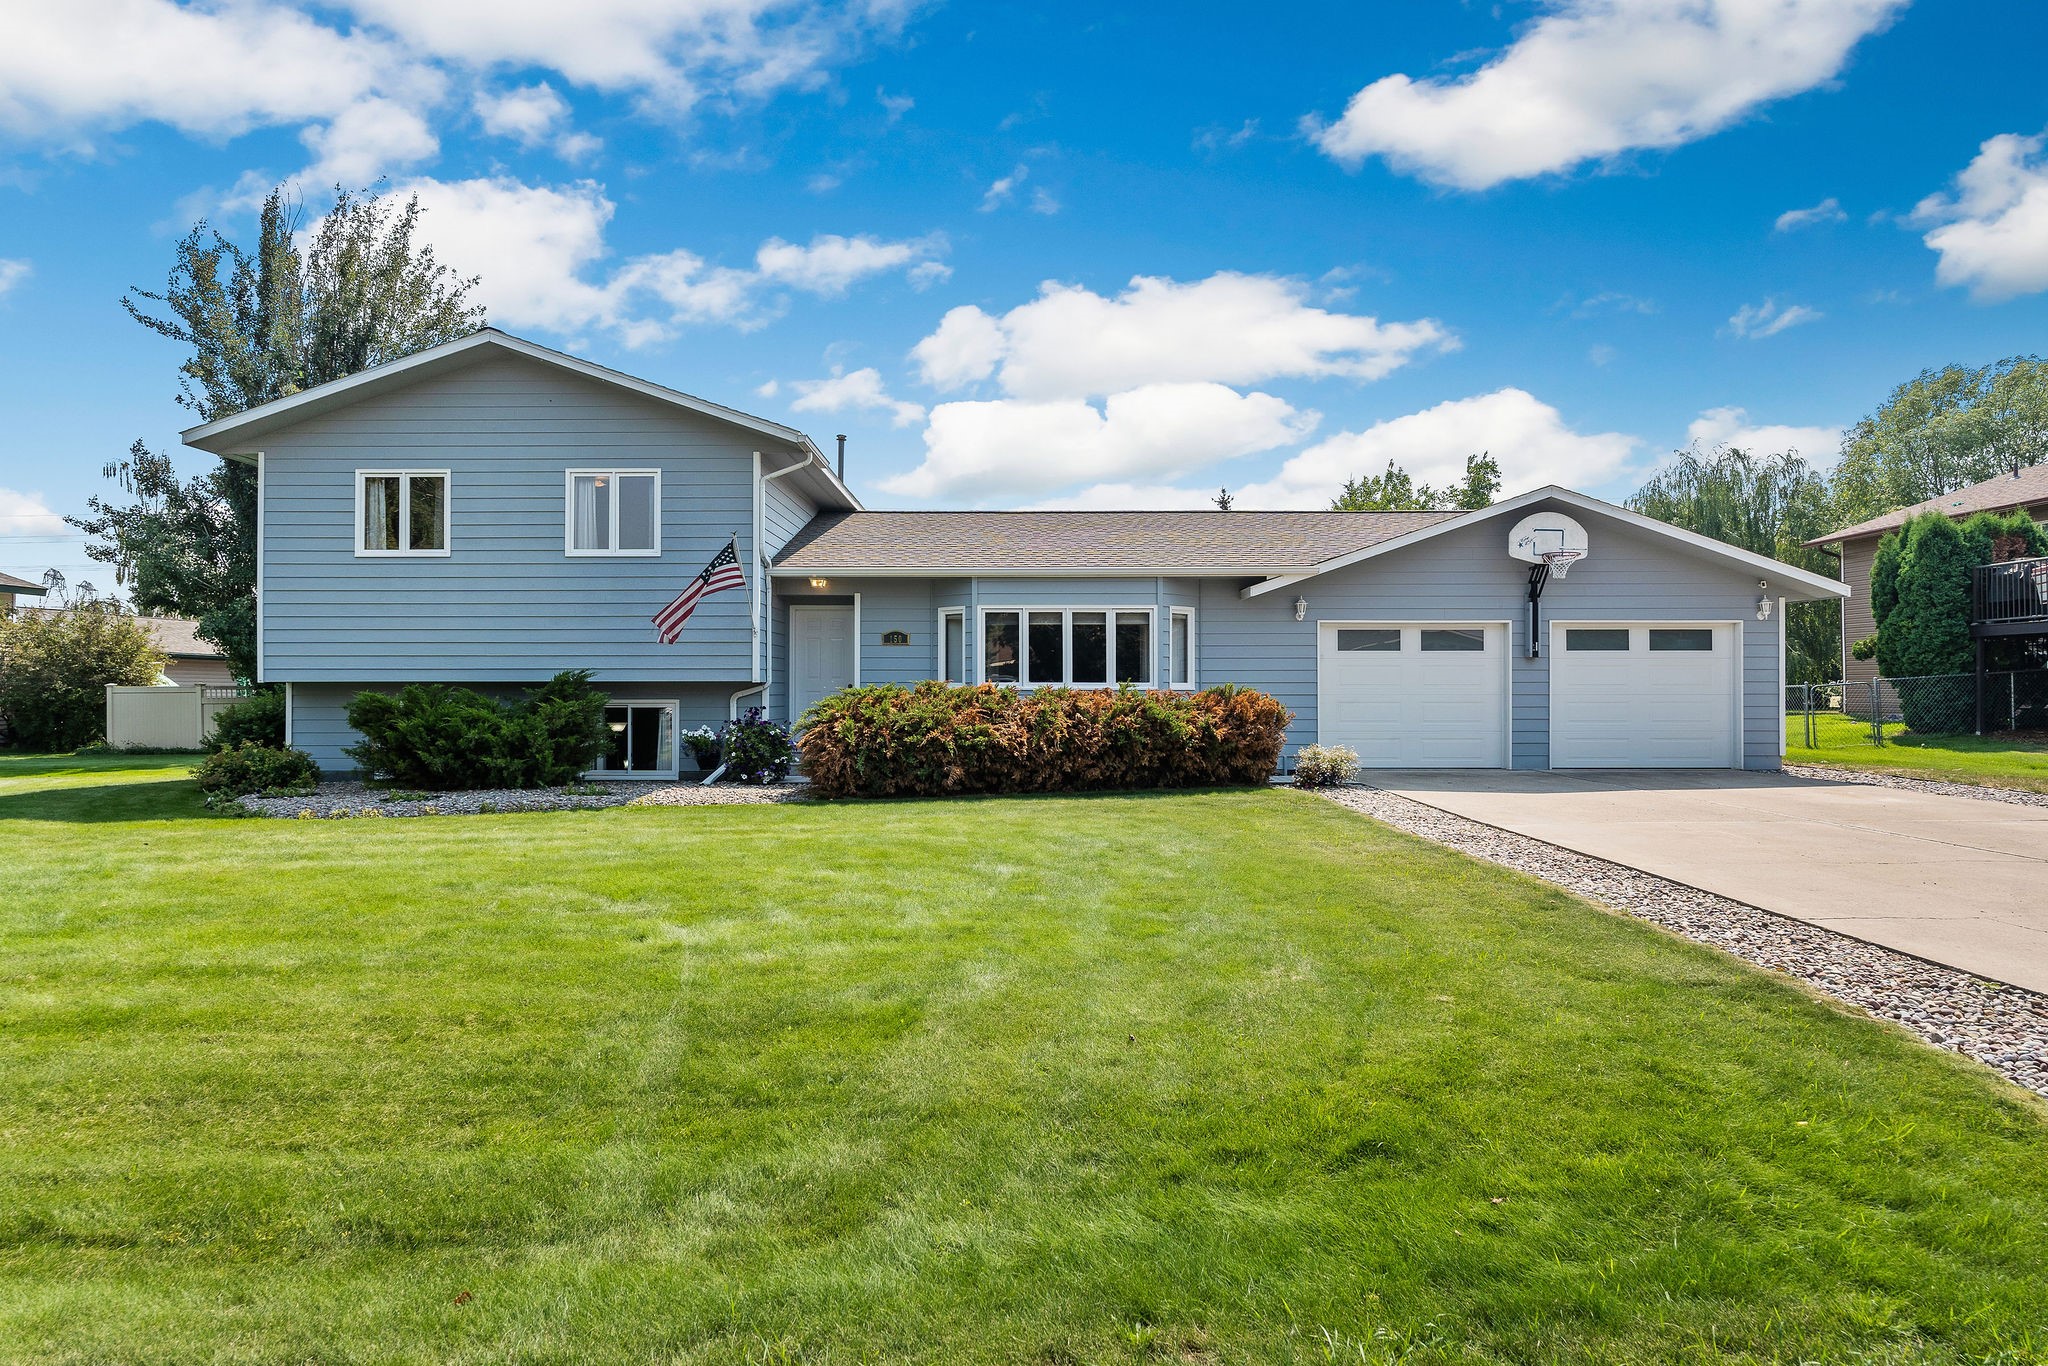 Look no further! This exceptionally well-cared for home sits in a beautiful, established neighborhood with prime location to Kalispell shopping and schools. Inside you’ll find gorgeous updates to the kitchen/living area including leathered finish granite countertops and modern laminate flooring. A complete remodel recently done to the main bathroom showcases a custom tile shower/tub  with a double vanity and LED mirrors. Two spacious bedrooms upstairs give you plenty of room for a king-size bed! Downstairs, enjoy a cozy den with gas fireplace, a 3rd bedroom, bath and laundry. The expansive backyard with mature trees, deck and patio is an amazing setting for BBQ’s and fun with family and friends. Newer roof and garage doors. Oversized crawl space provides ample room for storage. Call Jessica Sickler (406)261-2935 or your real estate professional today!